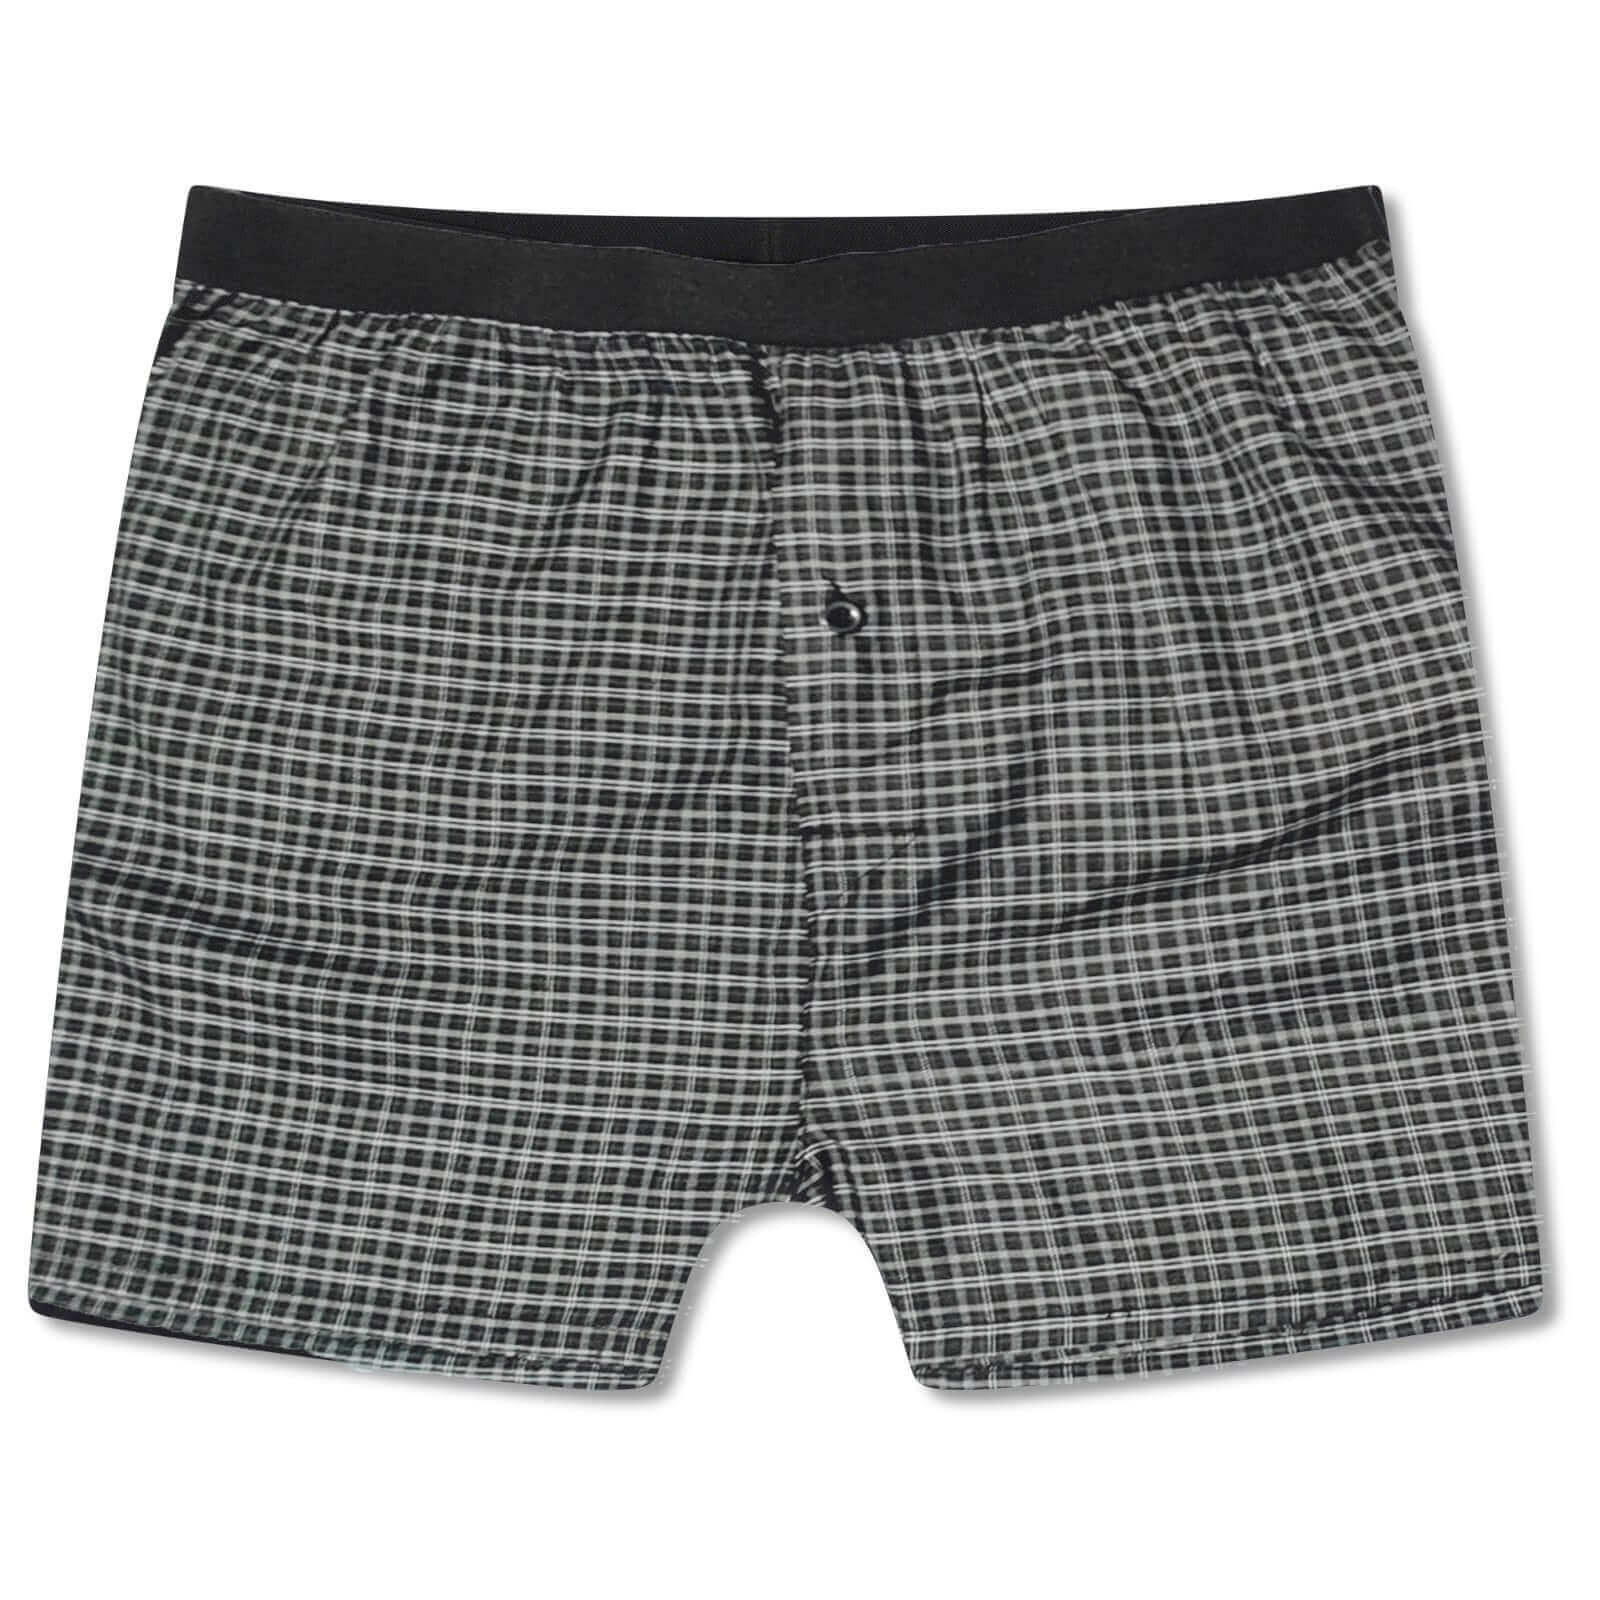 Pack Of 6 Men's Woven Boxers, Loose Fit Boxershorts, Comfort Waistband Underwear (MB02). Buy now for £8.00. A Boxer Shorts by Sock Stack. black, blue, boxer shorts, check, classic boxers, comfortable, cotton, cotton blend, grey, marl grey, mens, navy, red